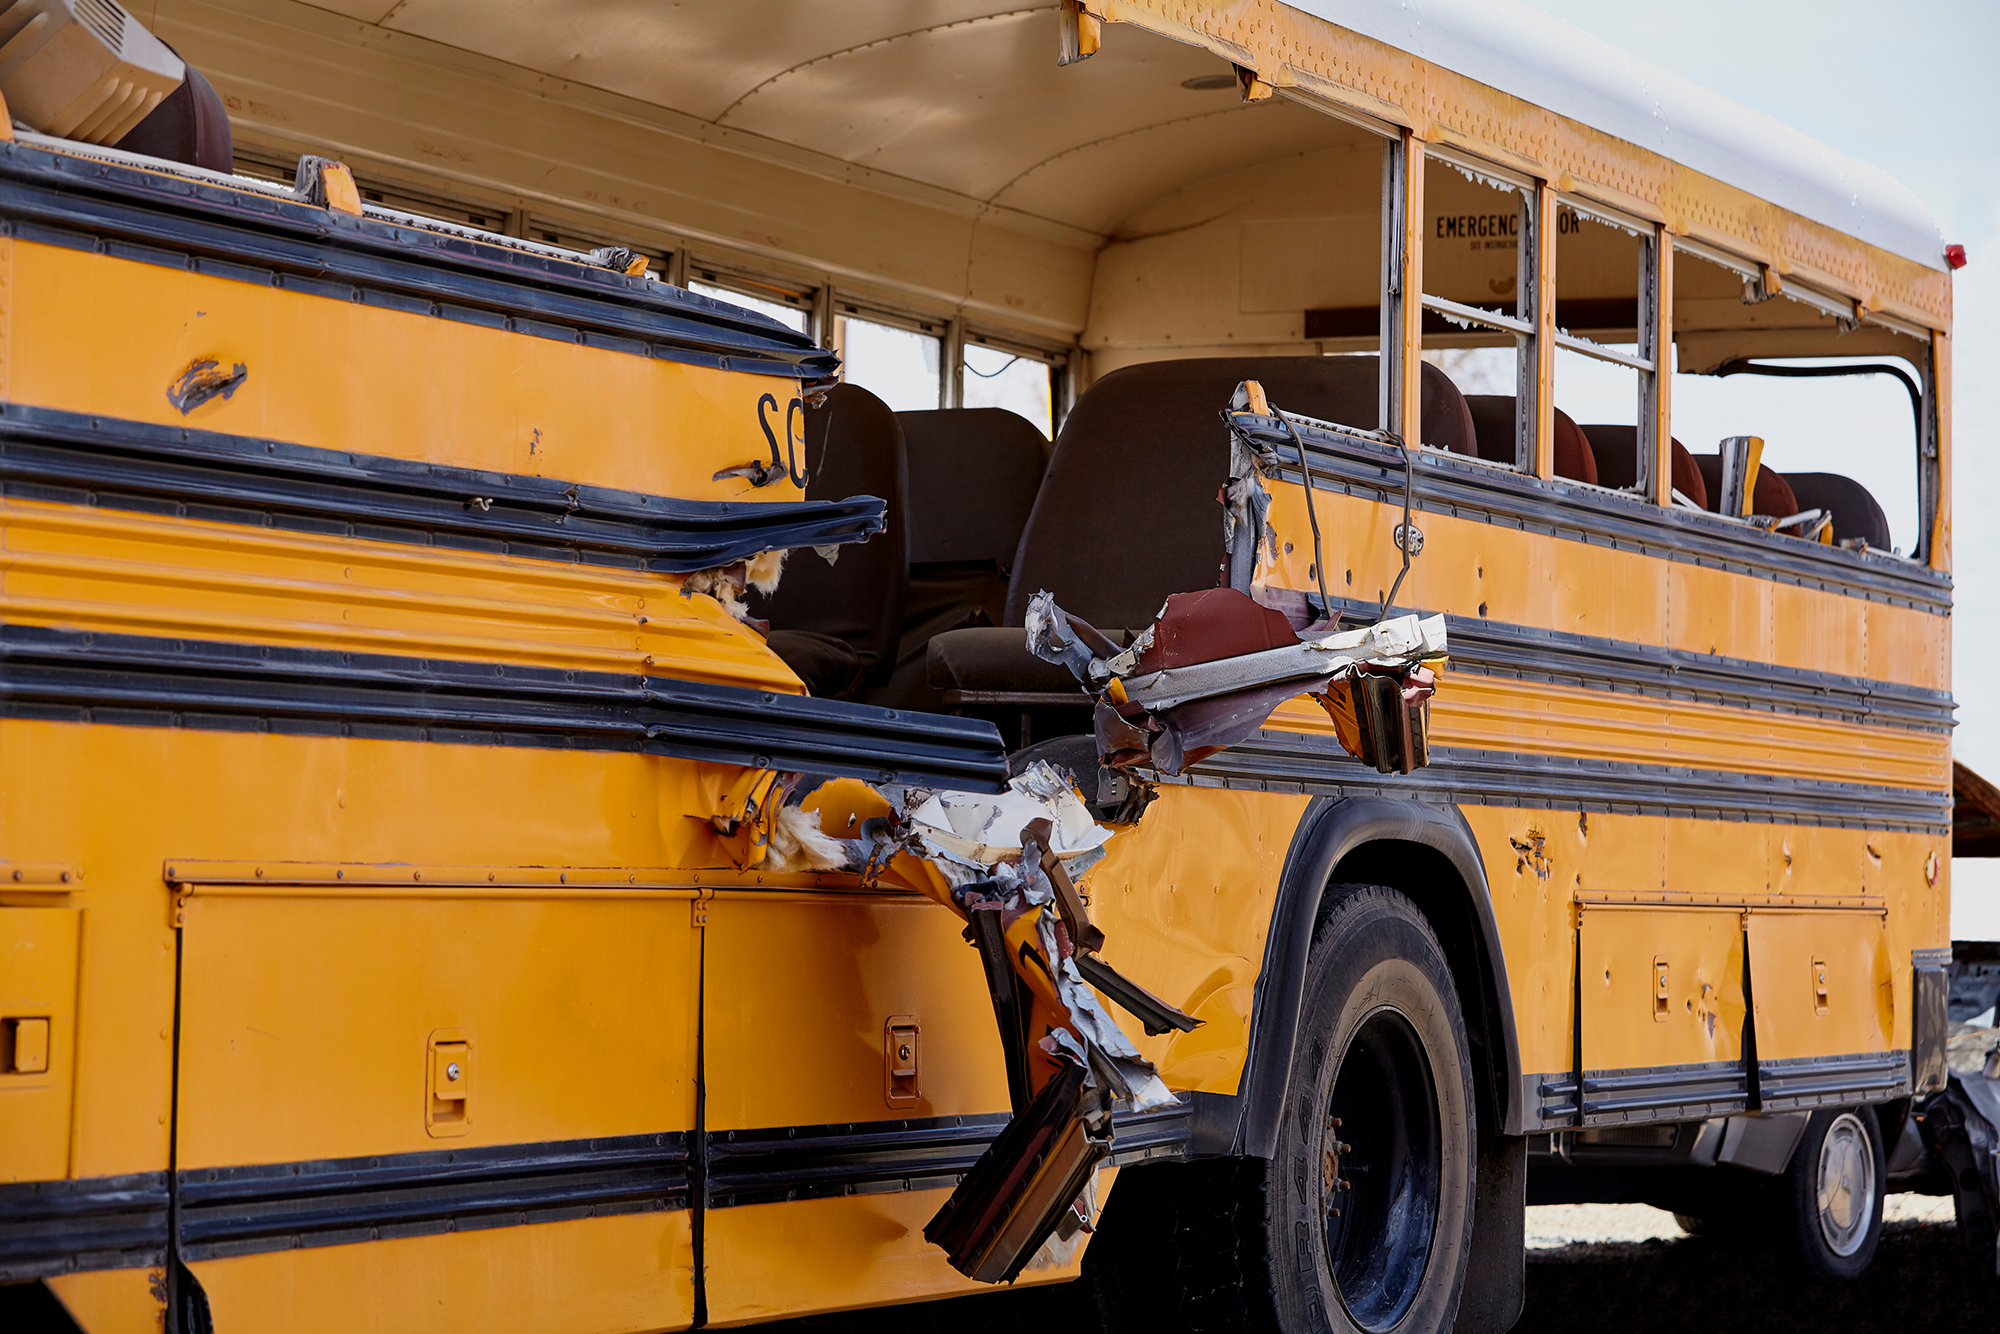 A school bus involved in a collision.